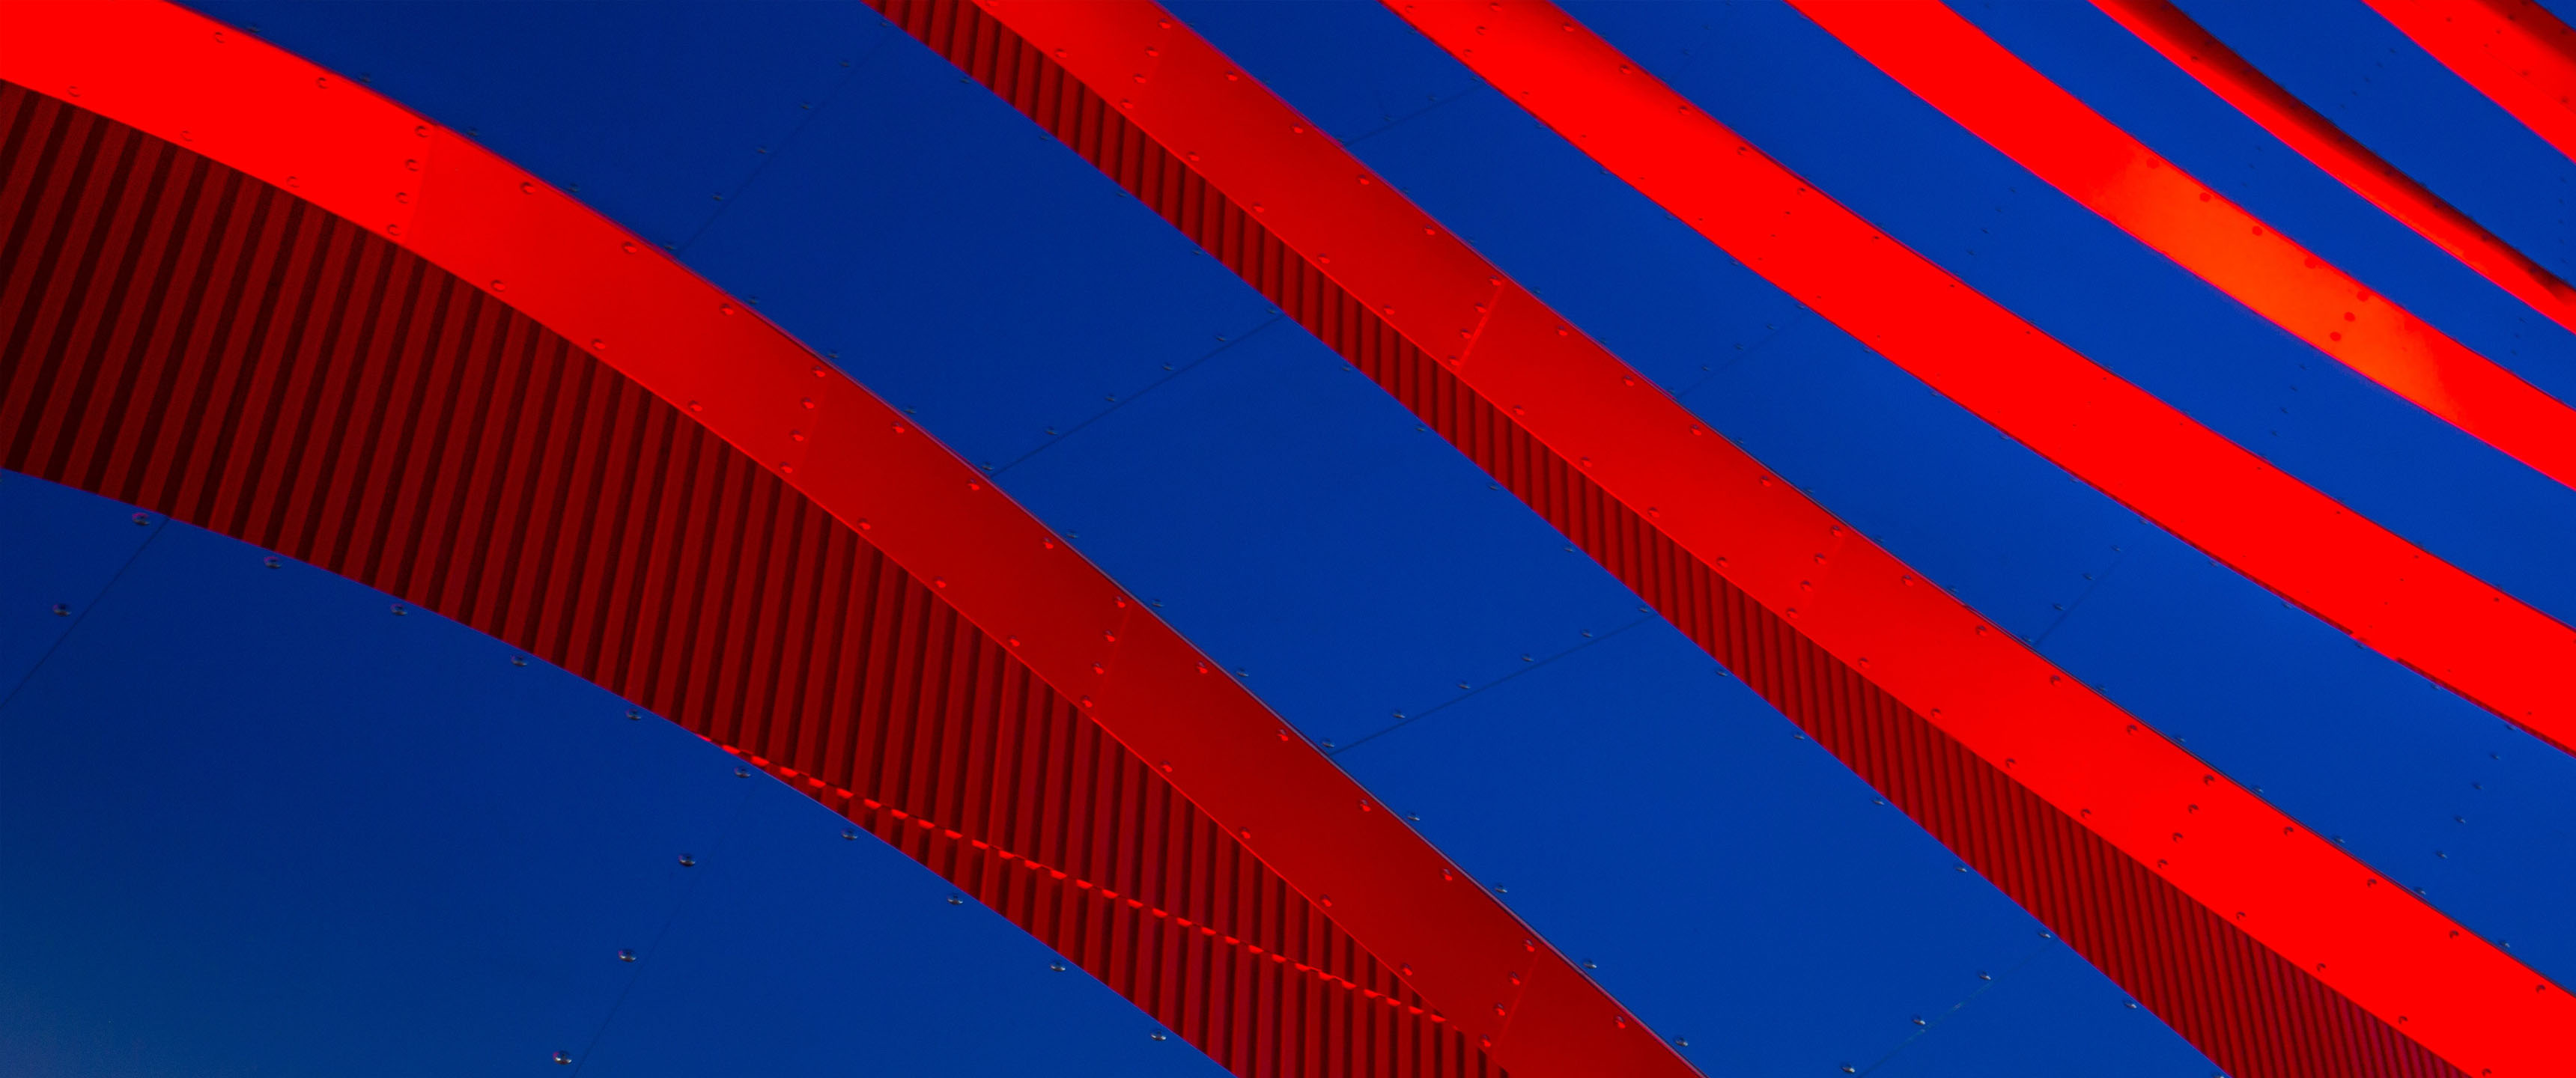 Red And Blue 21 9 Wallpaper Ultrawide Monitor 21 9 Wallpapers